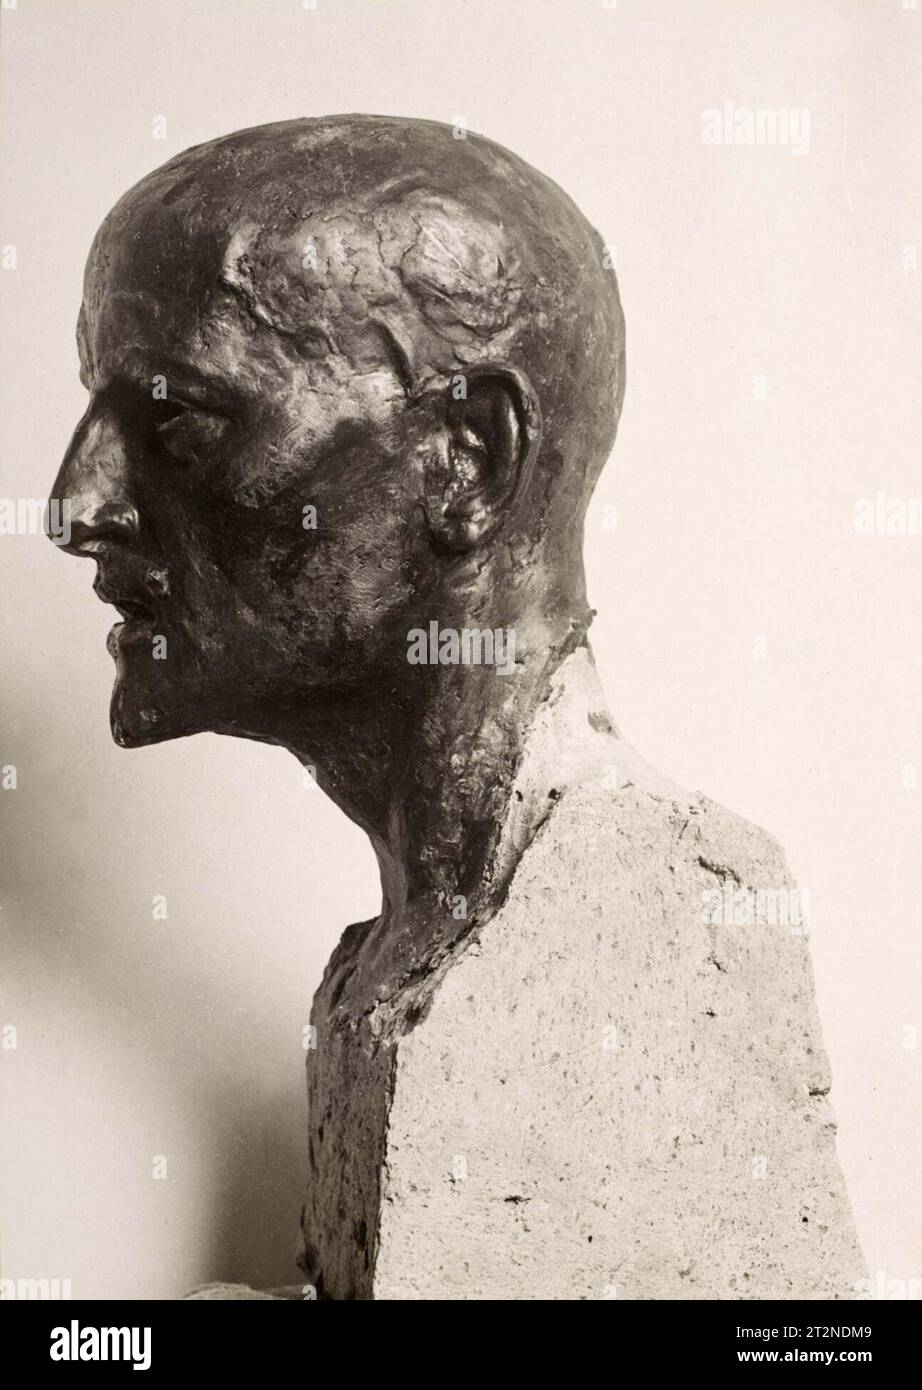 1920 , Roma , ITALY : The portrait of celebrated italian poet and dramatist GABRIELE D'ANNUNZIO ( 1863 - 1938  ), by sculptor GUIDO CALORI ( 1885 - 1960 ), exposed for first time at Biennale Romana d'Arte . Unknown photographer . - HISTORY - FOTO STORICHE - ARTE  - ARTS - SCULTURA - SCULPTURE - SCULTORE - SCULTURA - SCULPTOR - profilo - profili - head - testa - busto - bust - RITRATTO - PORTRAIT - POETA - POET - POESIA - POETRY - SCRITTORE - WRITER - DRAMATIS - DRAMMATURGO - LETTERATURA - LETERATURE - LETTERATO - DANNUNZIO - ITALIA --- It is strictly forbidden to publish this photo except in r Stock Photo